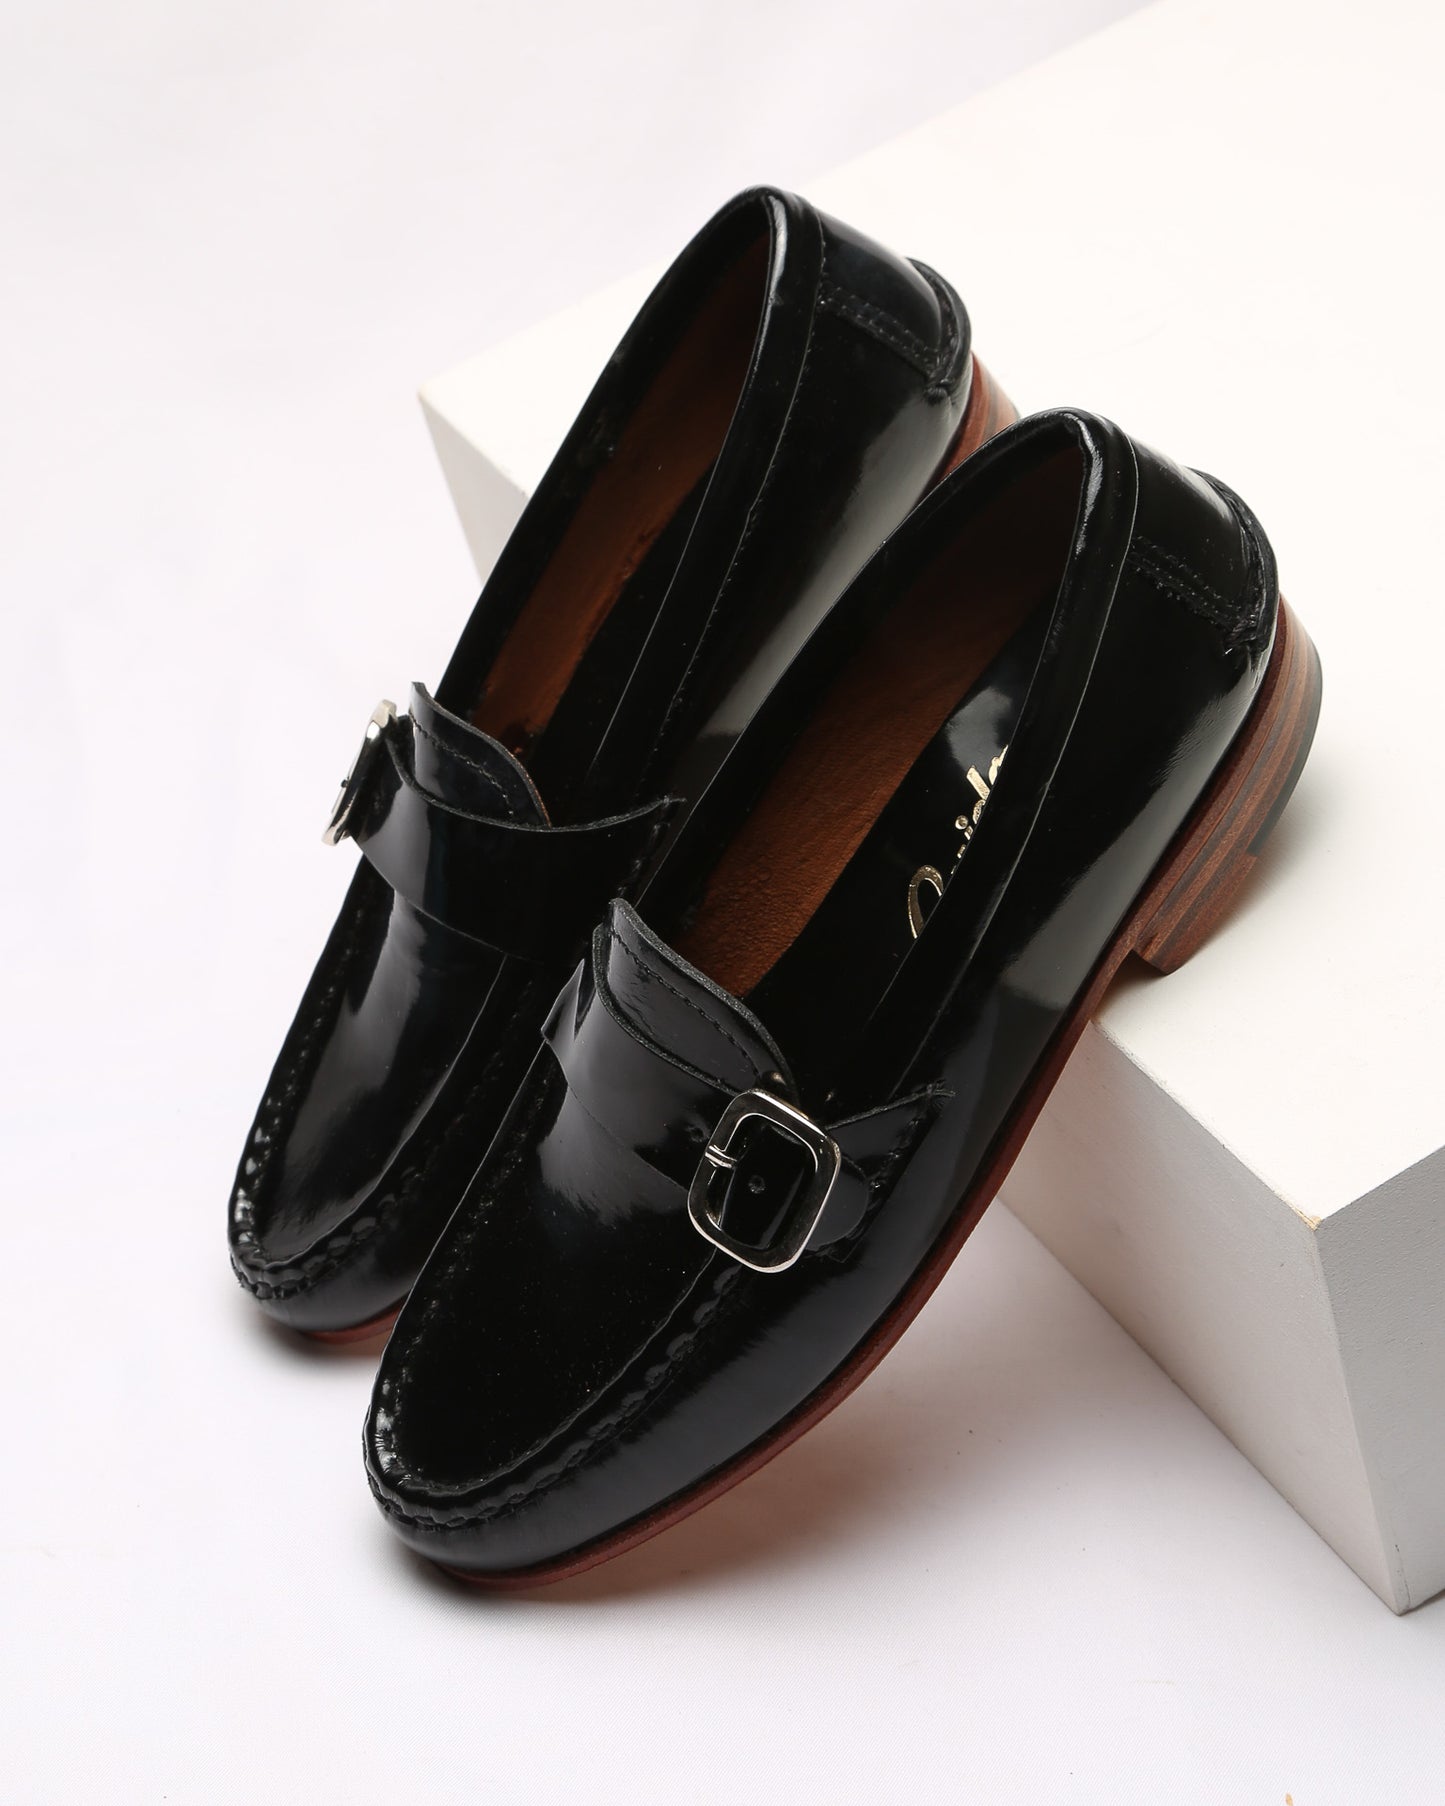 Moccasin 5320 with Buckle Patent Black